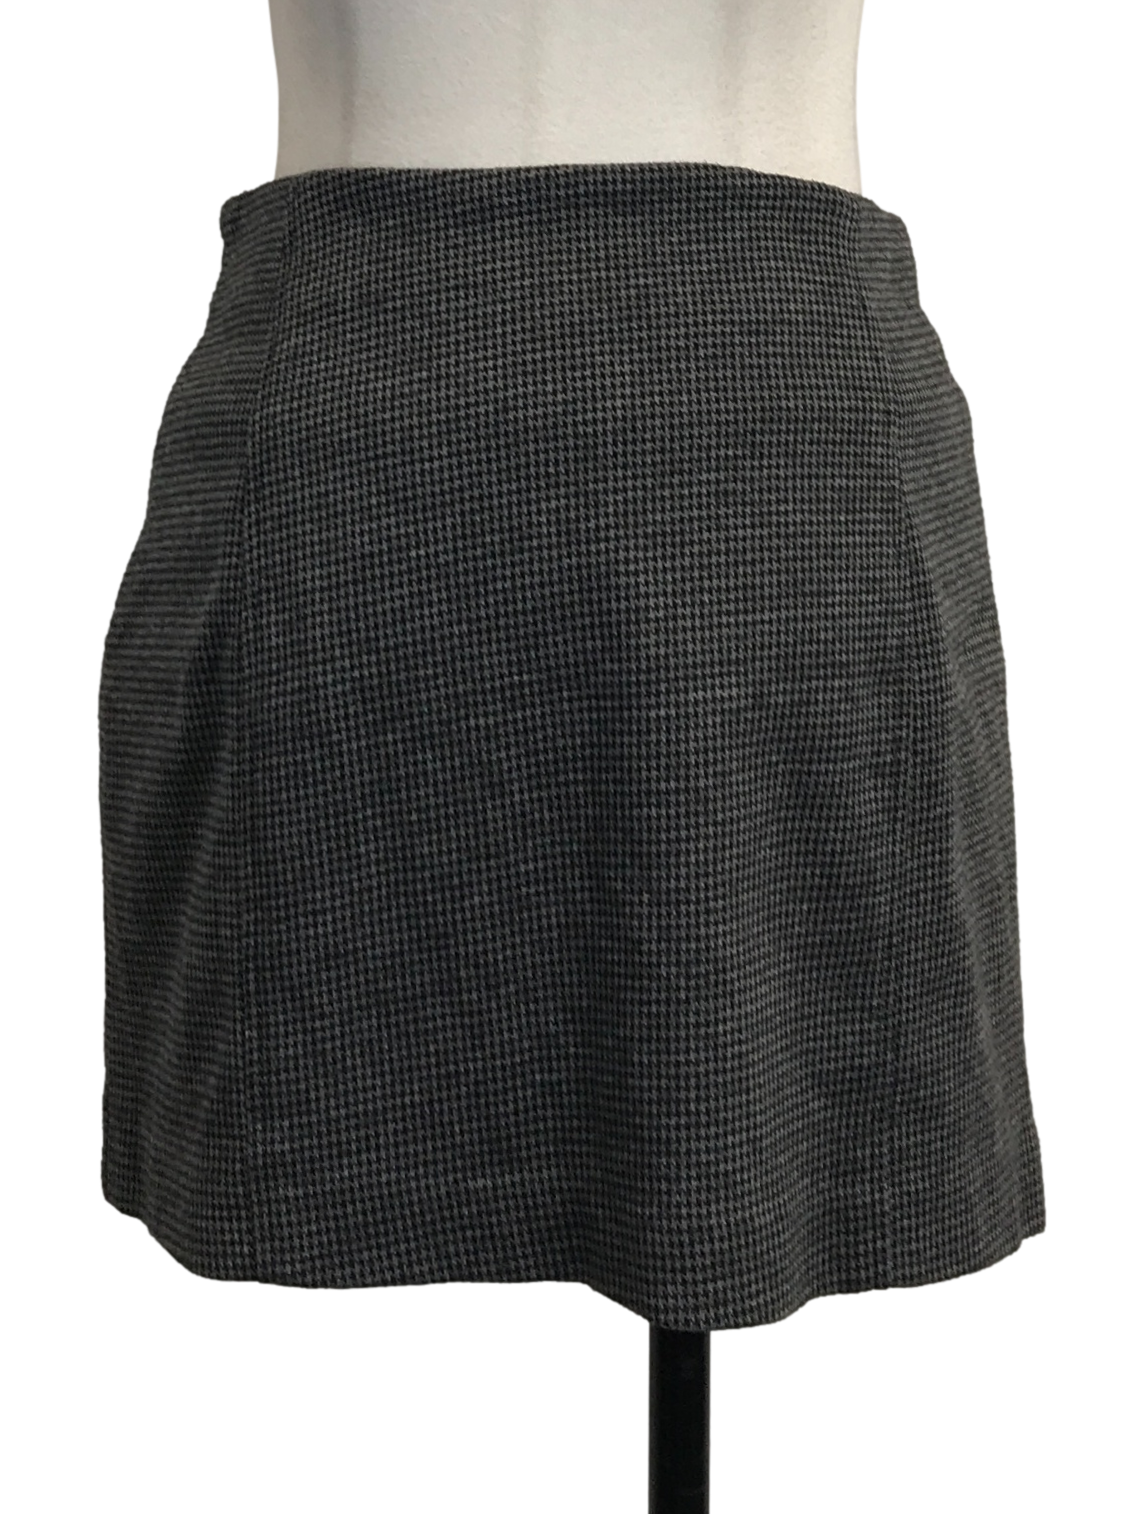 Charcoal Houndstooth A-Line Skirt